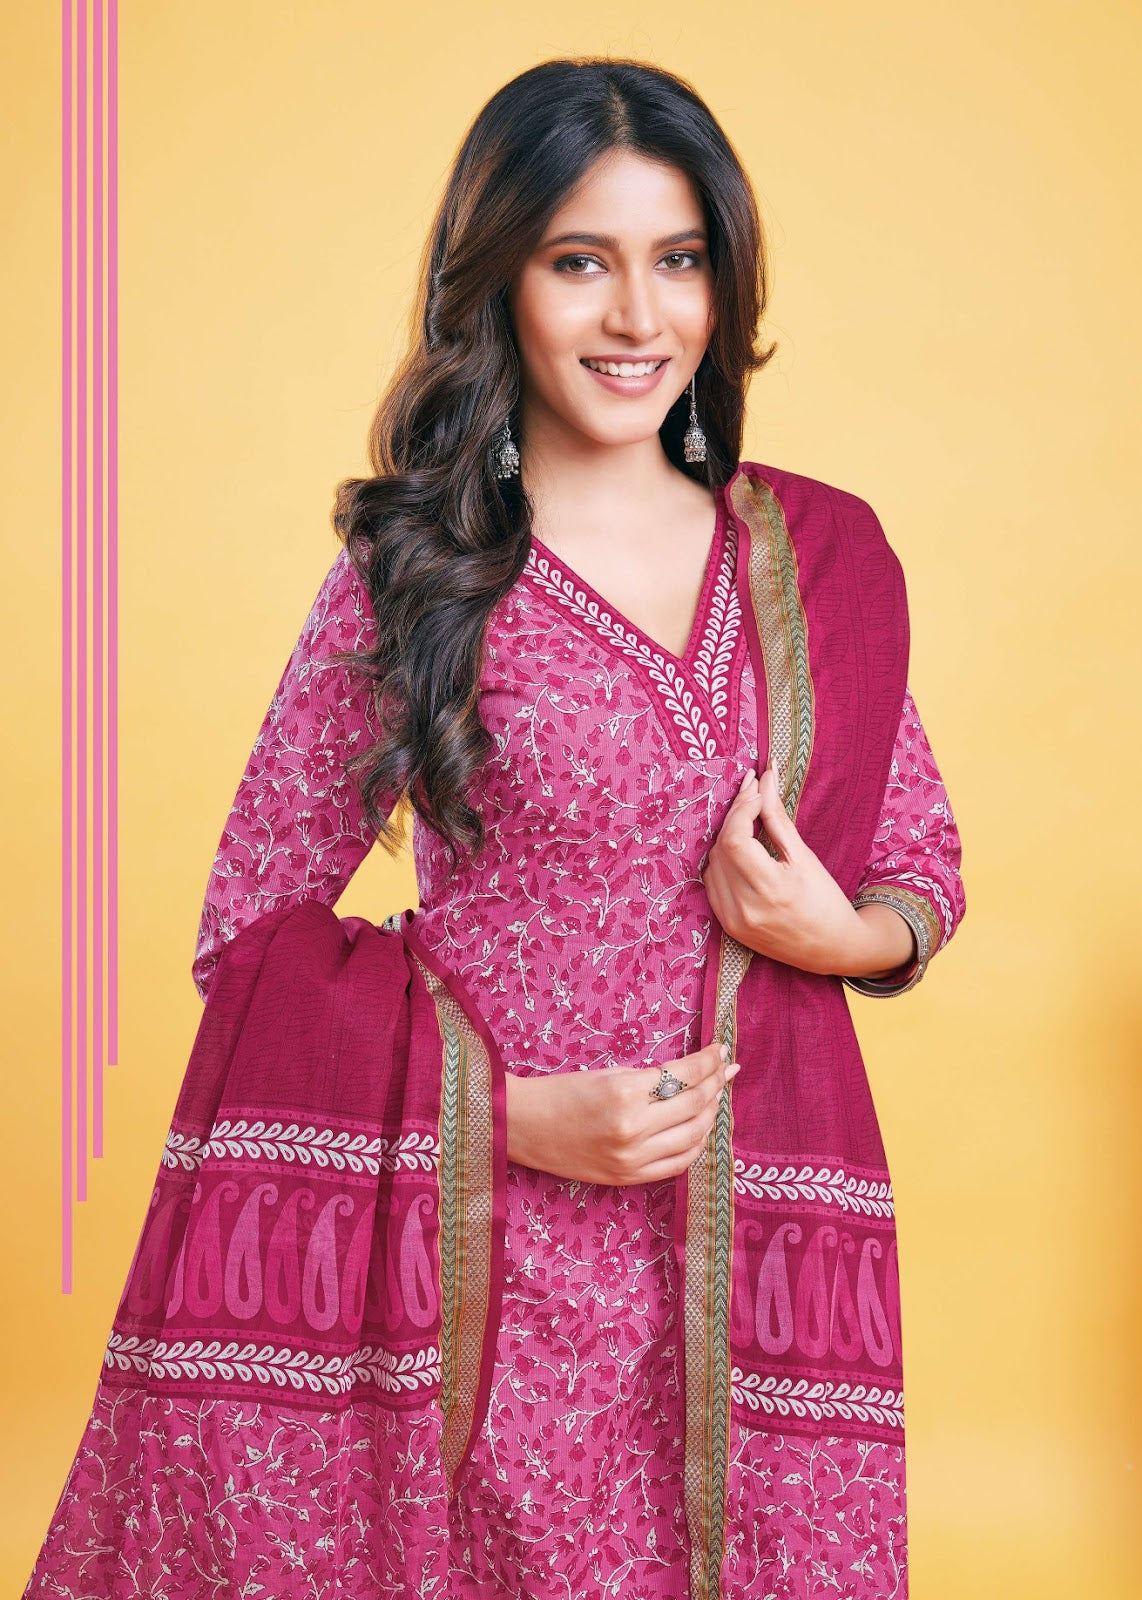 Gadwal Border Vol 9 Aarvi Fashions Readymade Pant Style Suits